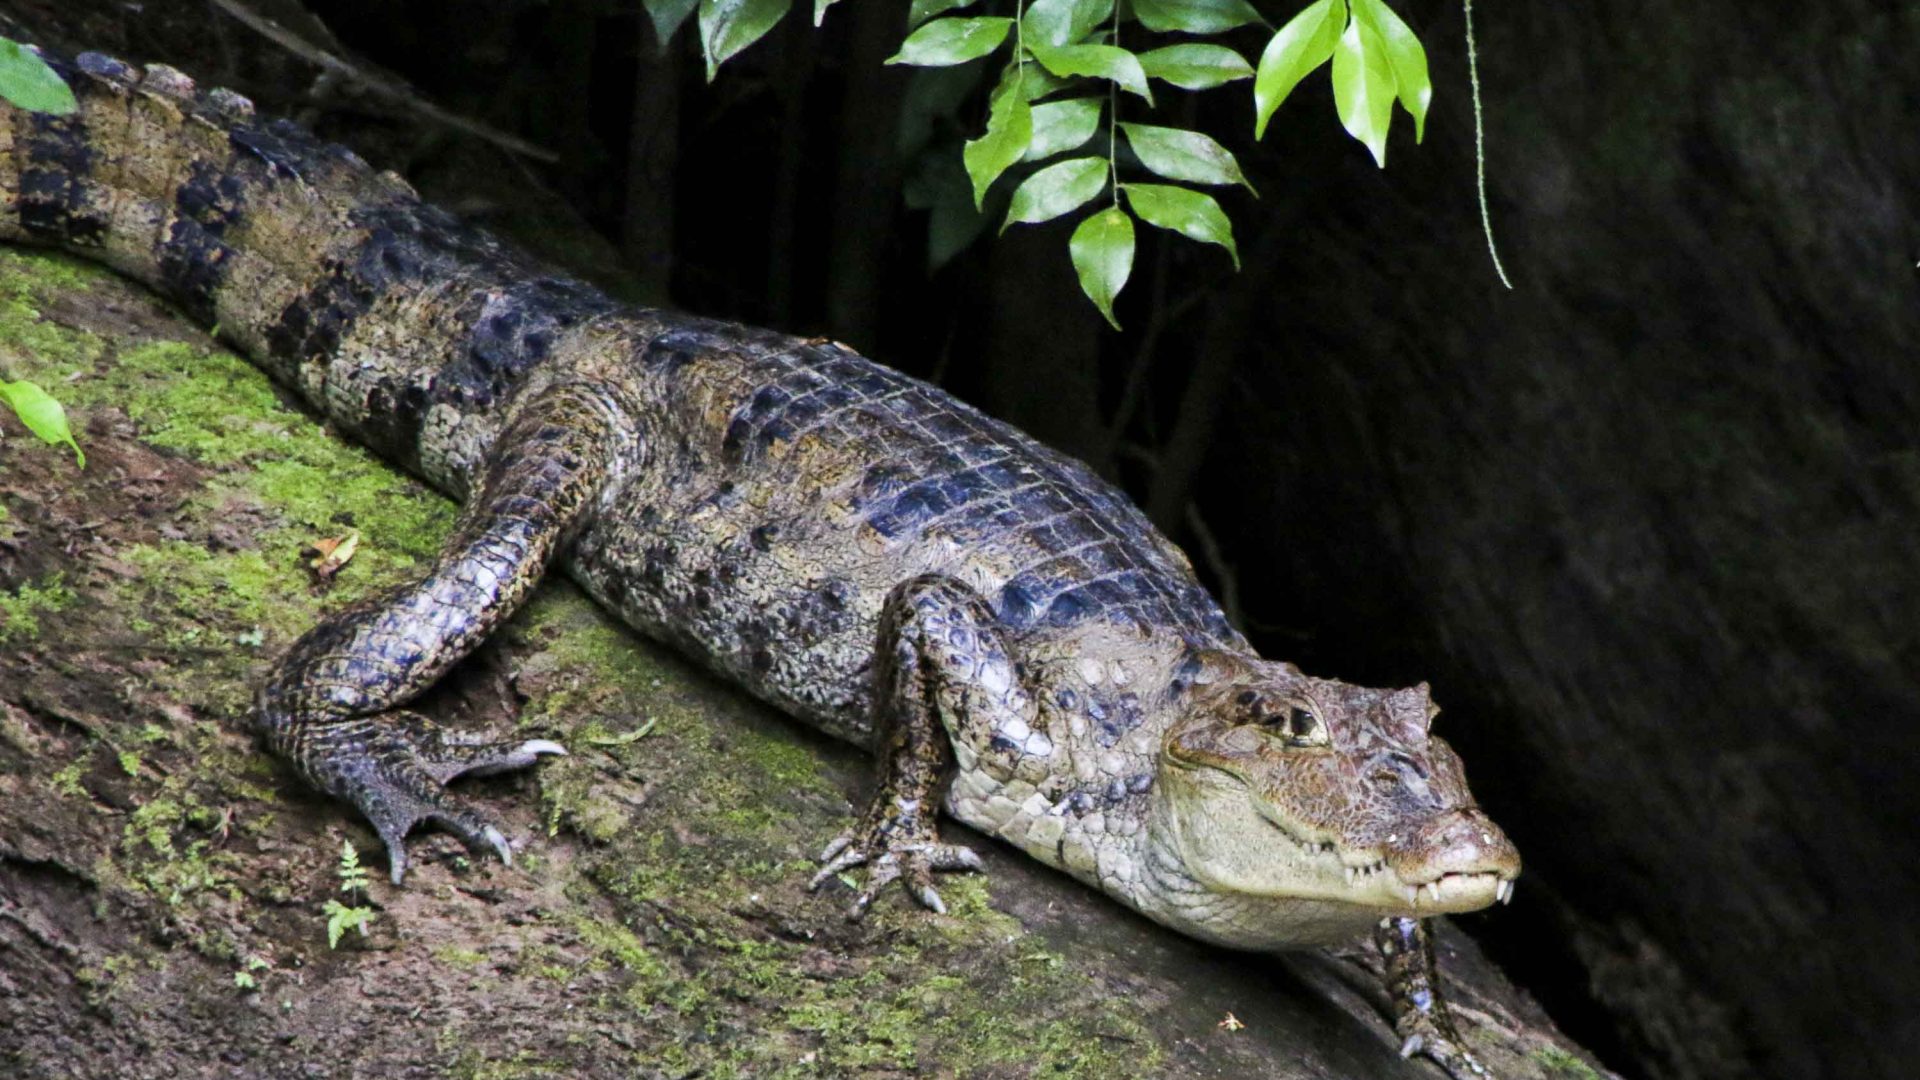 A caiman sits on a log by the water.